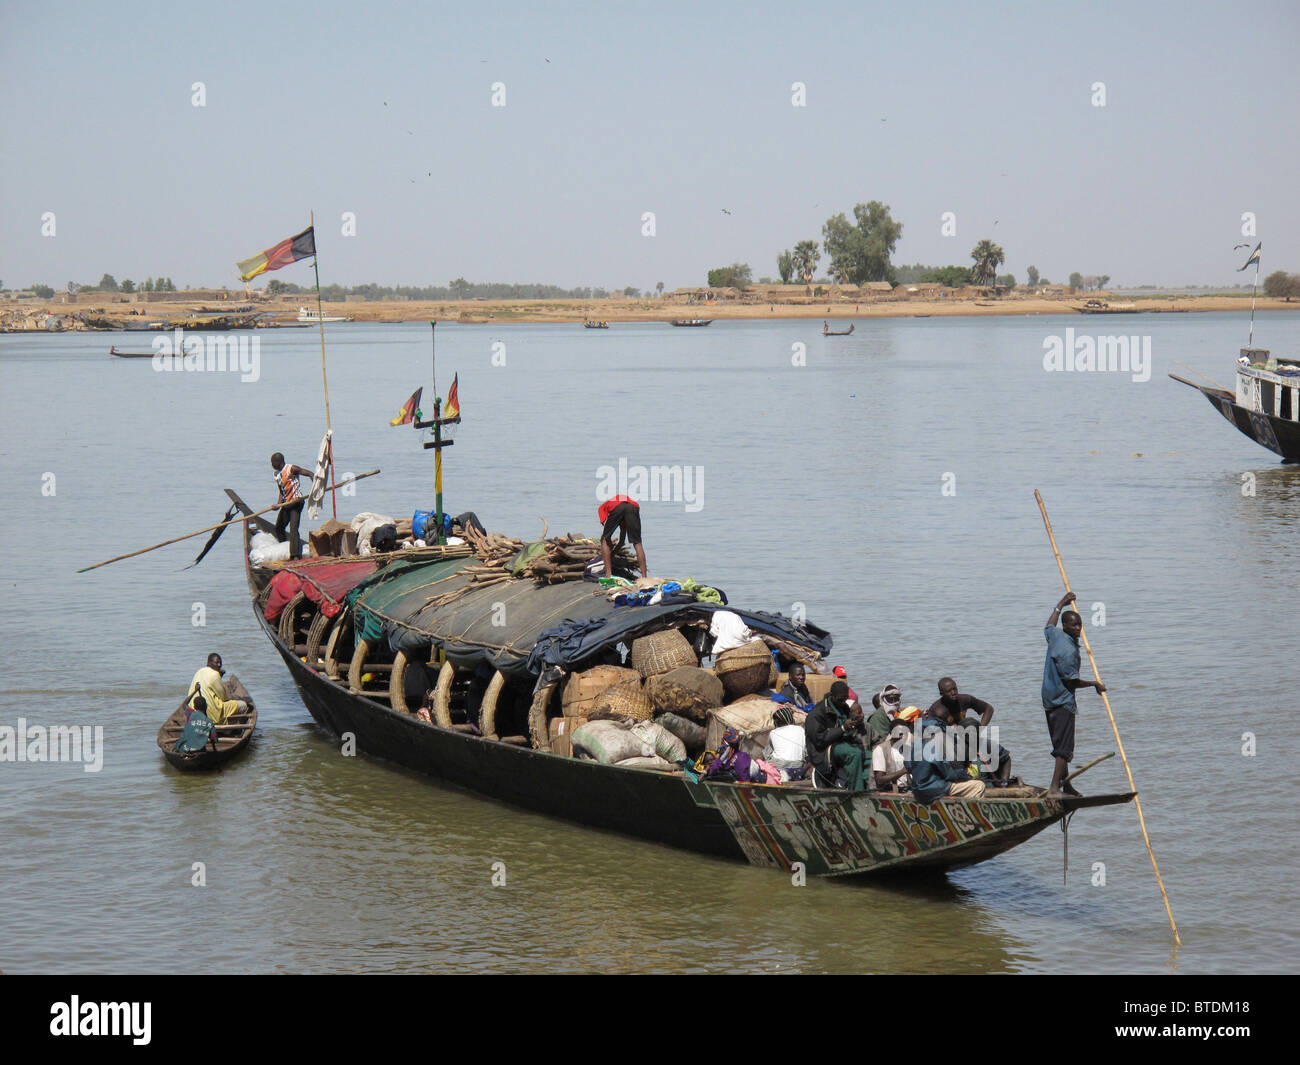 A wooden boat with passengers and luggage on board being paddled across water Stock Photo